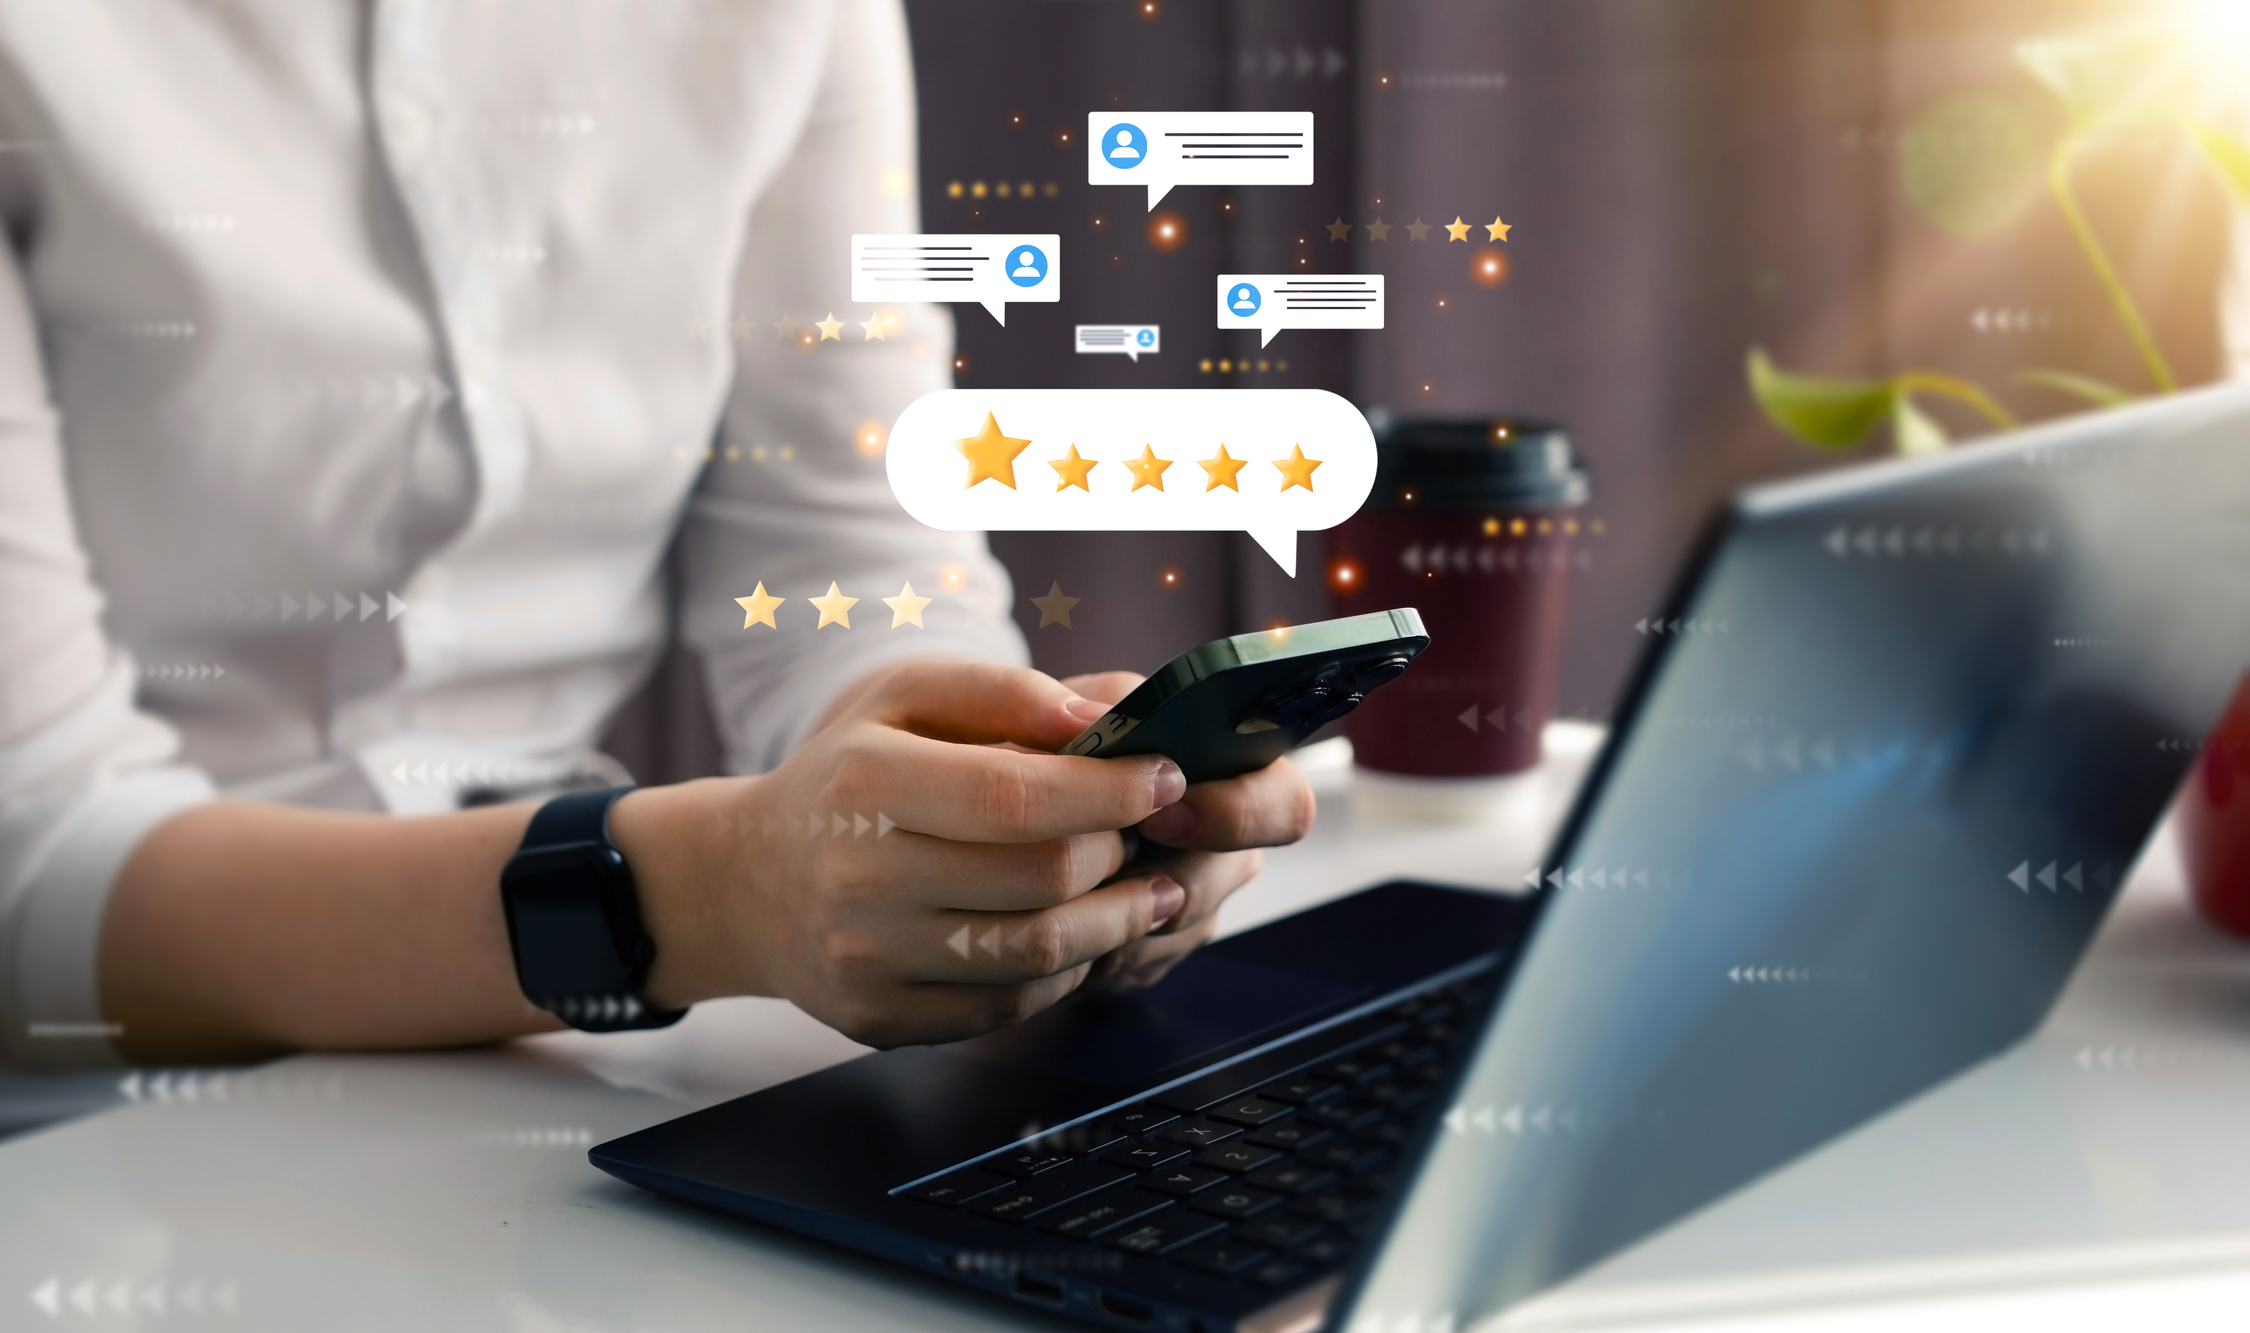 Woman holding a cellphone, leaving feedback on a product with gold five star rating feedback on virtual sreen. Customer review satisfaction feedback.Concept of satisfaction, quality and performance.